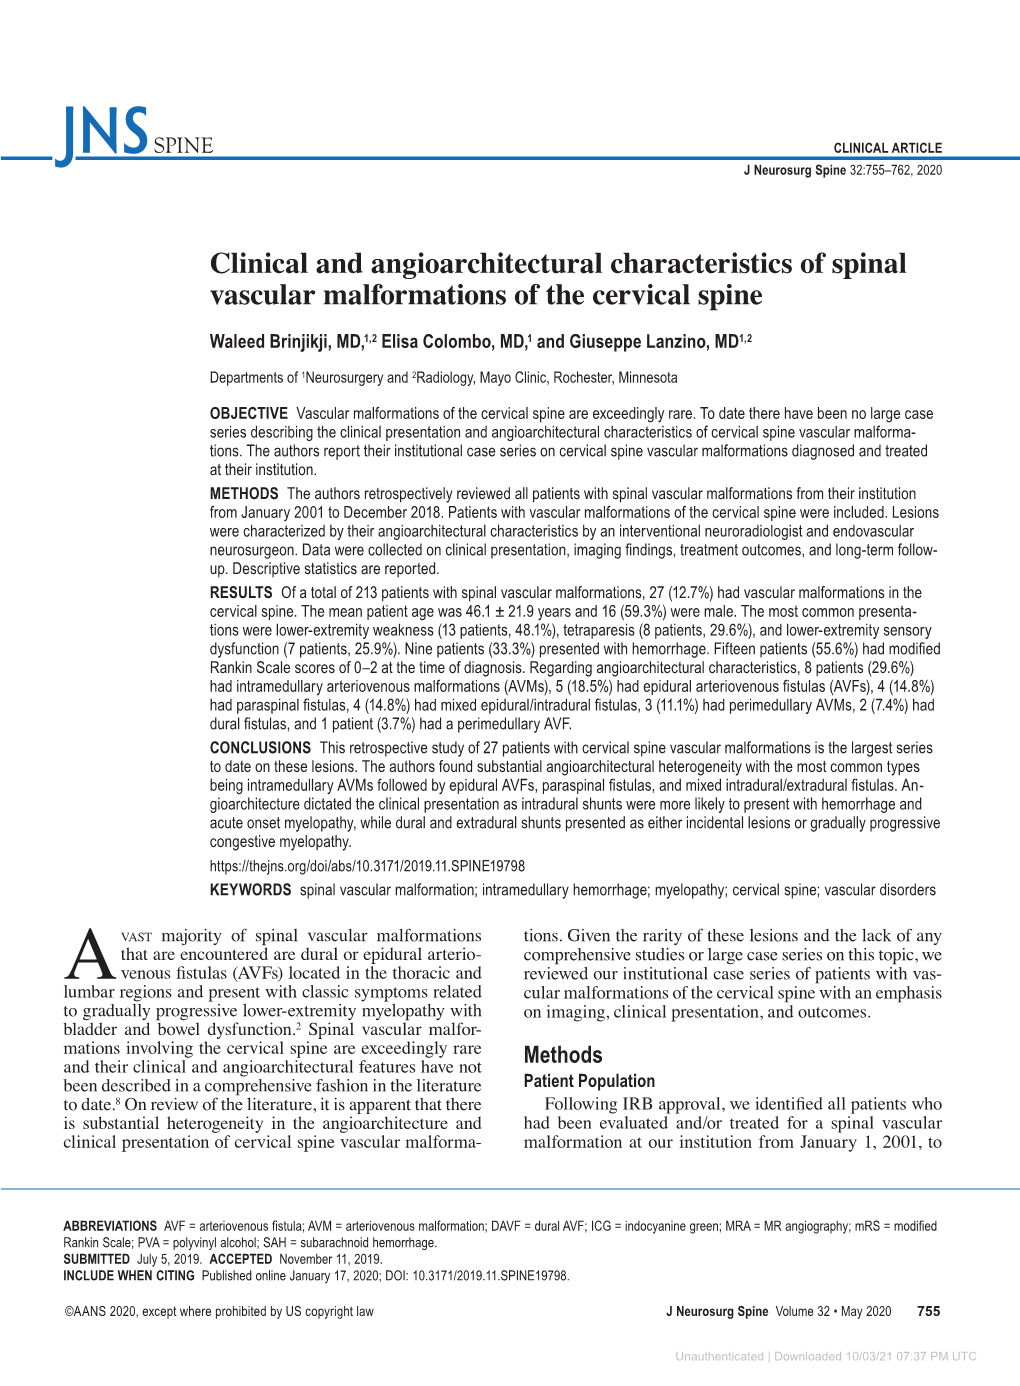 Clinical and Angioarchitectural Characteristics of Spinal Vascular